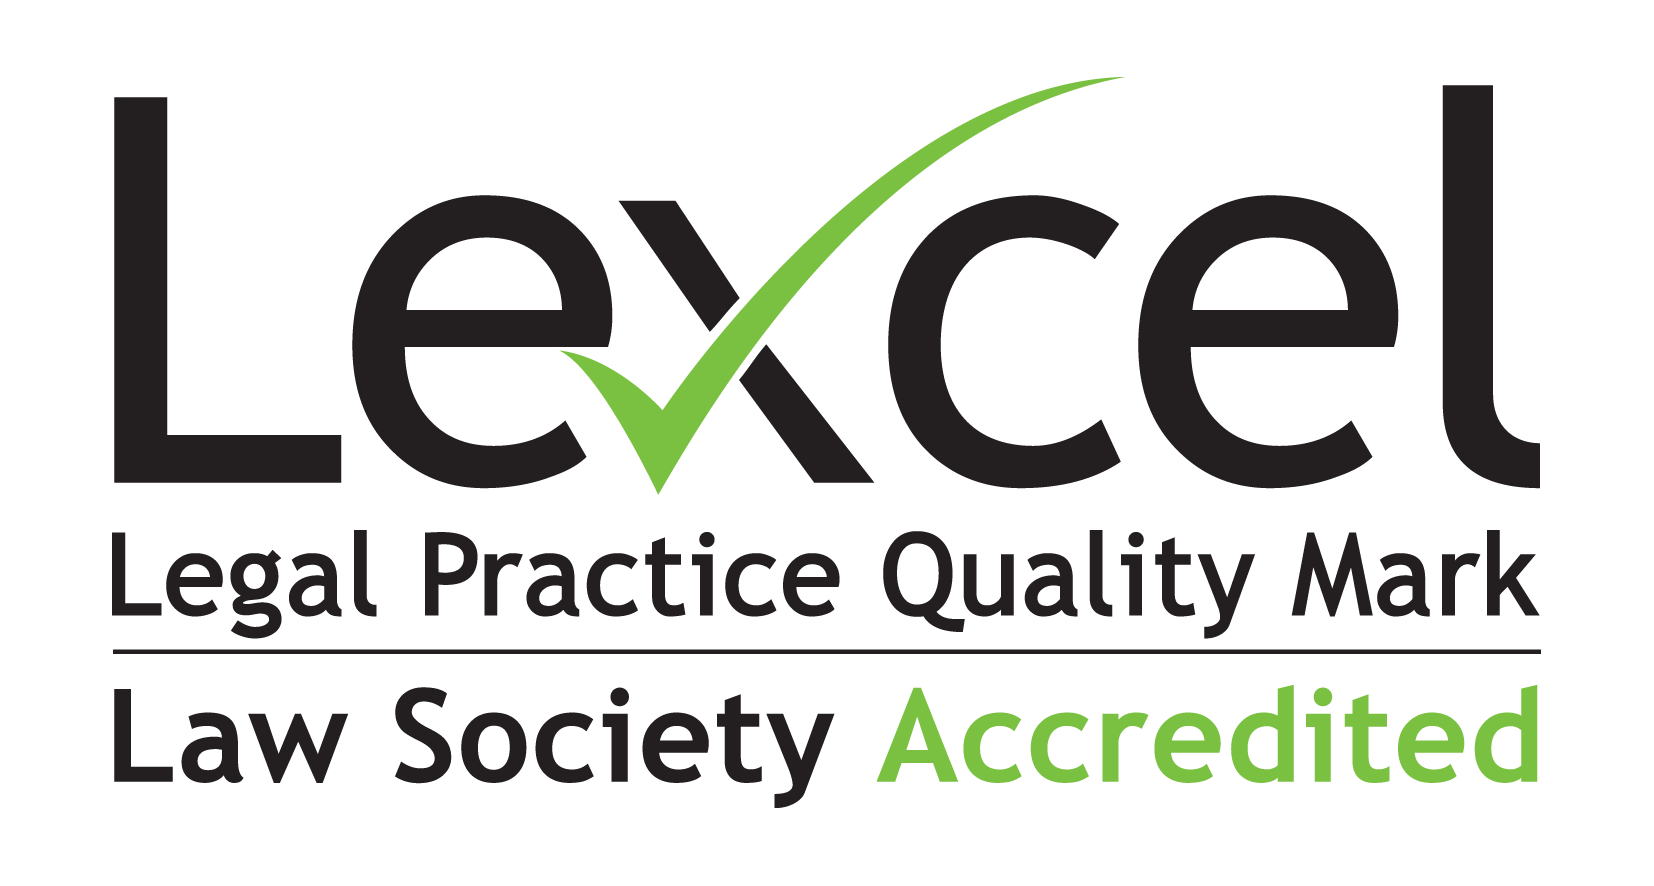 Lexcel Practice Management Standard Law Society Accredited Logo